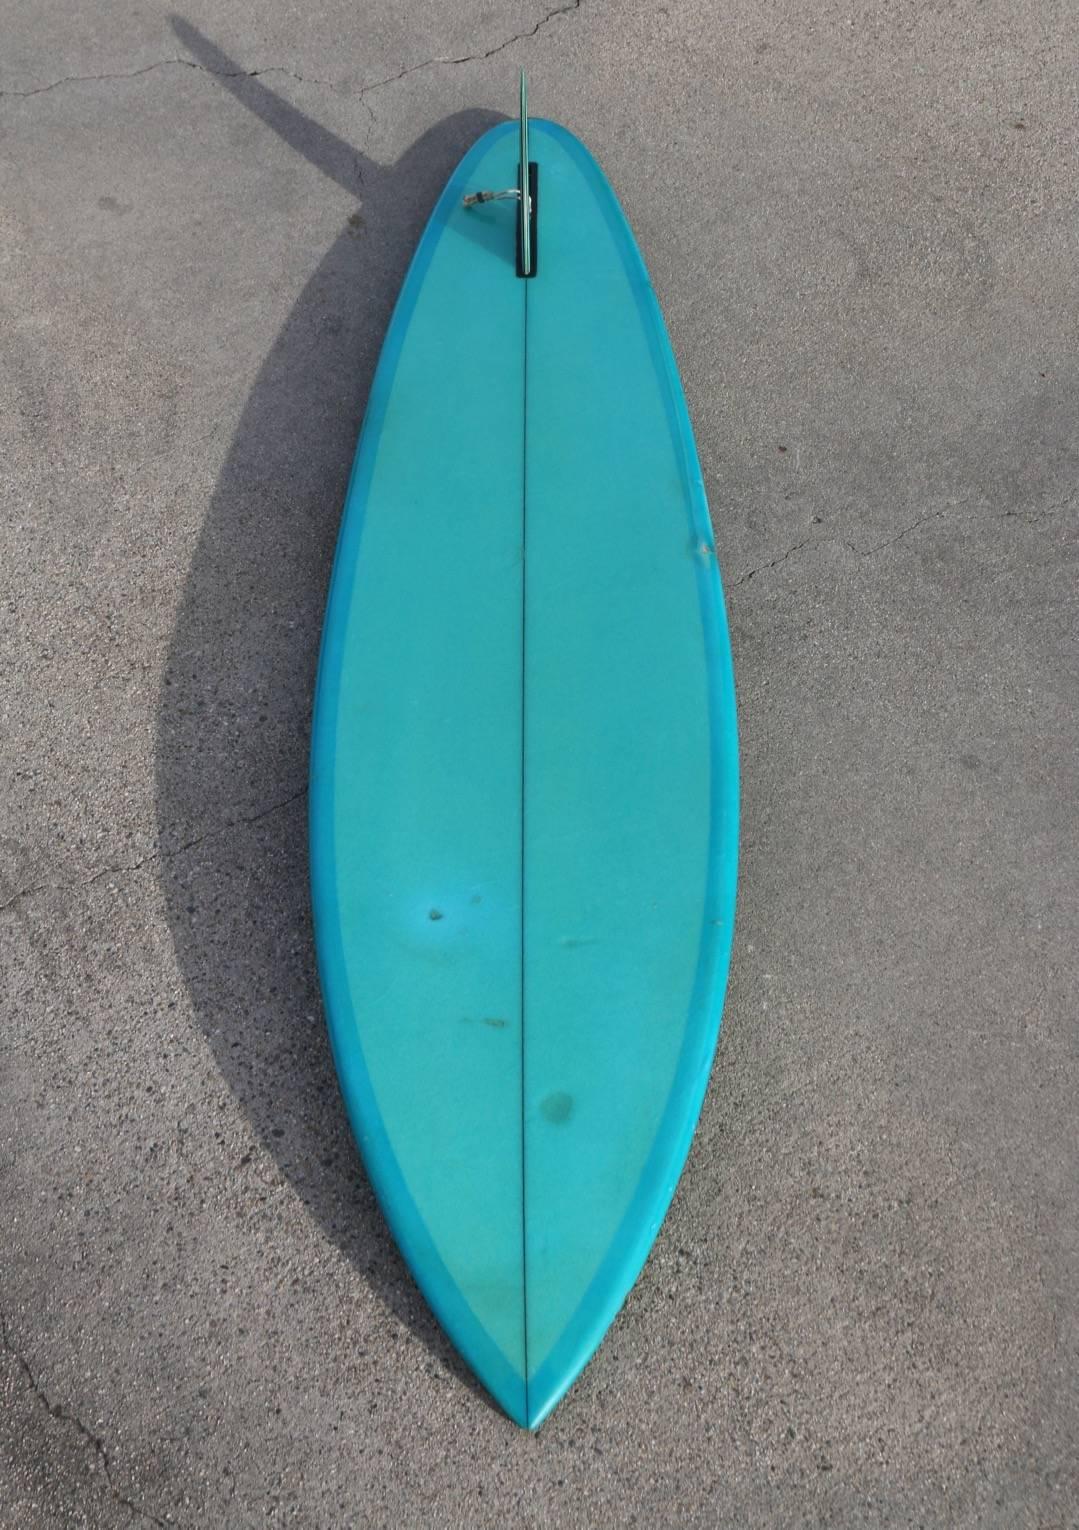 This vibrant turquoise surfboard is the perfect length to bring a splash of Surf Vibe and color into even the tightest spaces. The shortboard shape, the size, the fantastic logo and the color ooze fun in the sun. 

Fin is 8